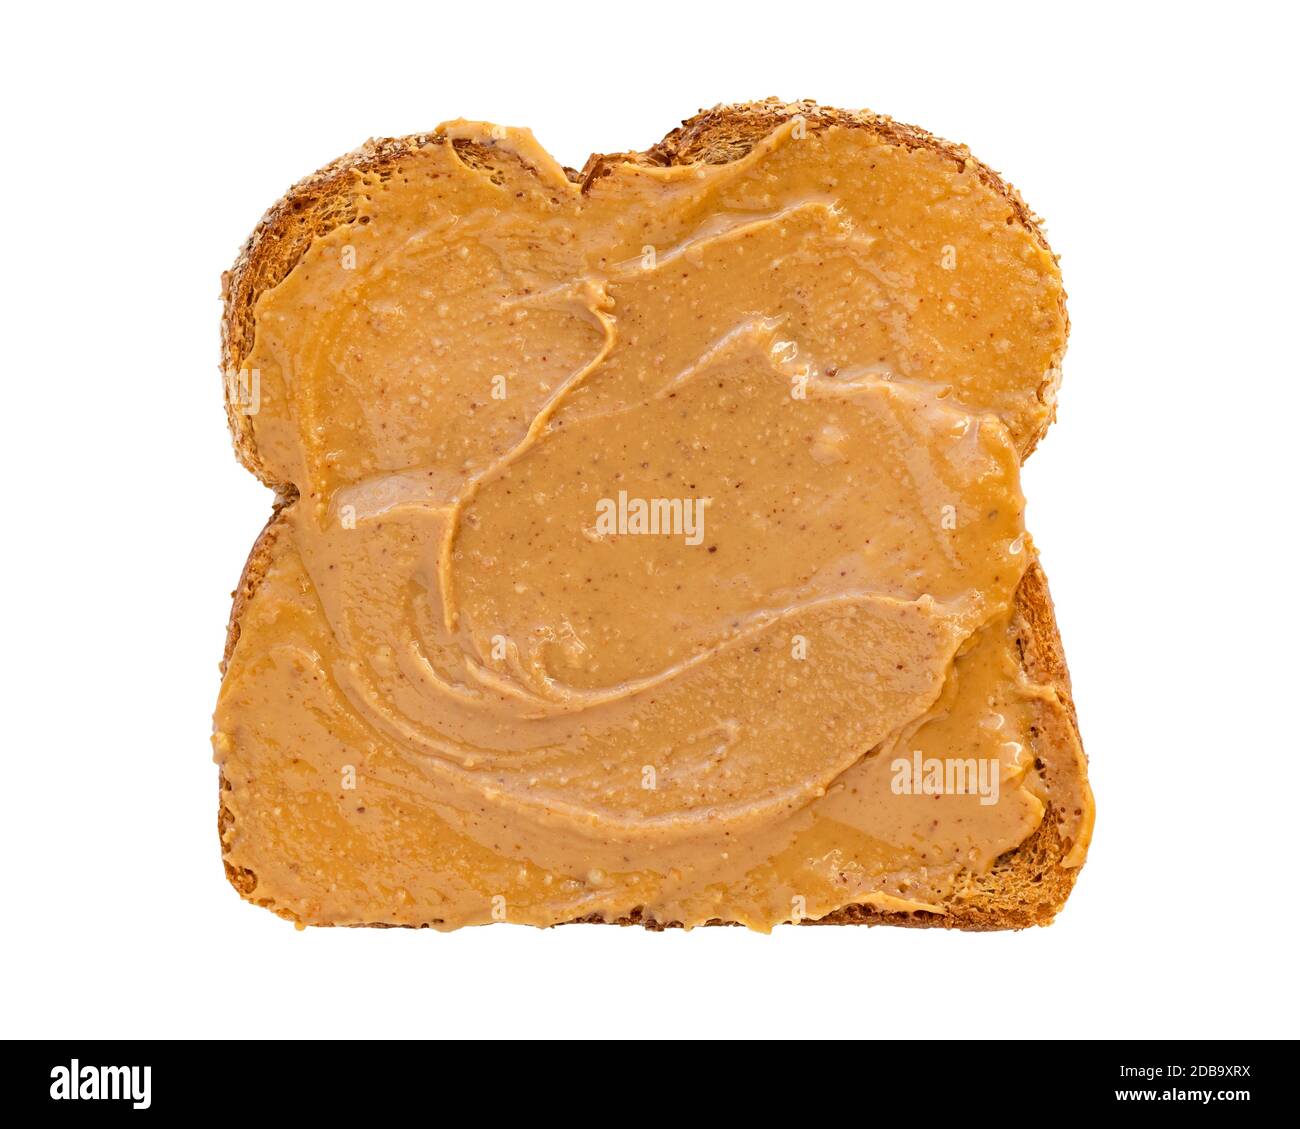 Creamy peanut butter spread on healthy whole wheat toast bread, isolated on white background, photographed from above Stock Photo